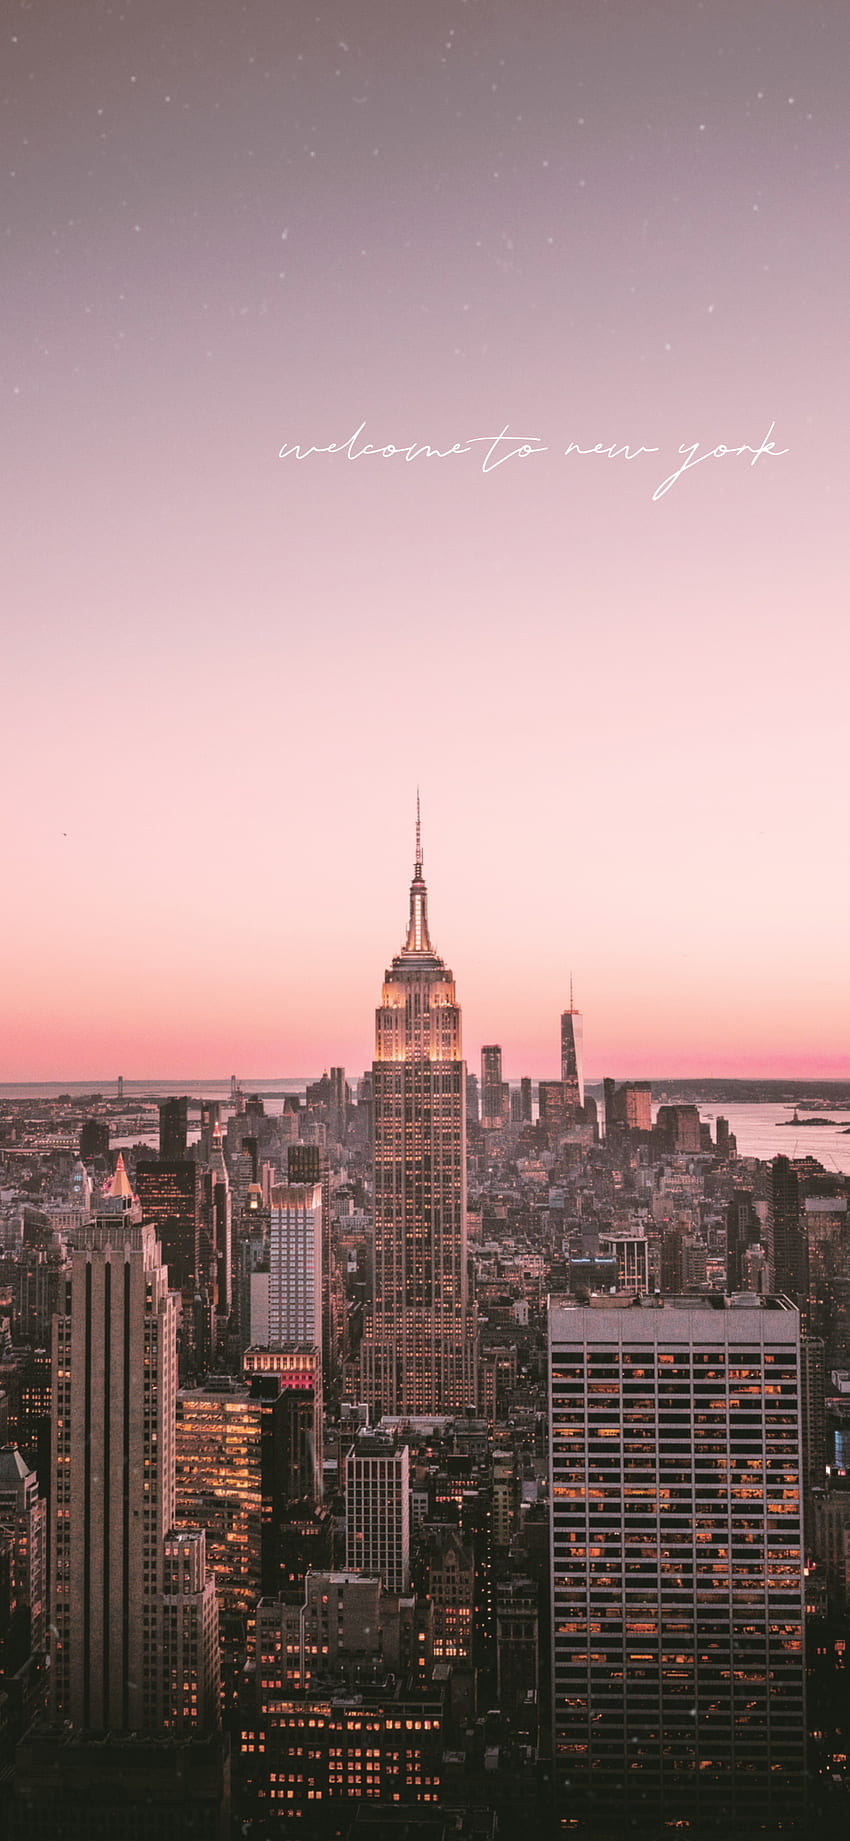 IPhone wallpaper of the city of New York - March